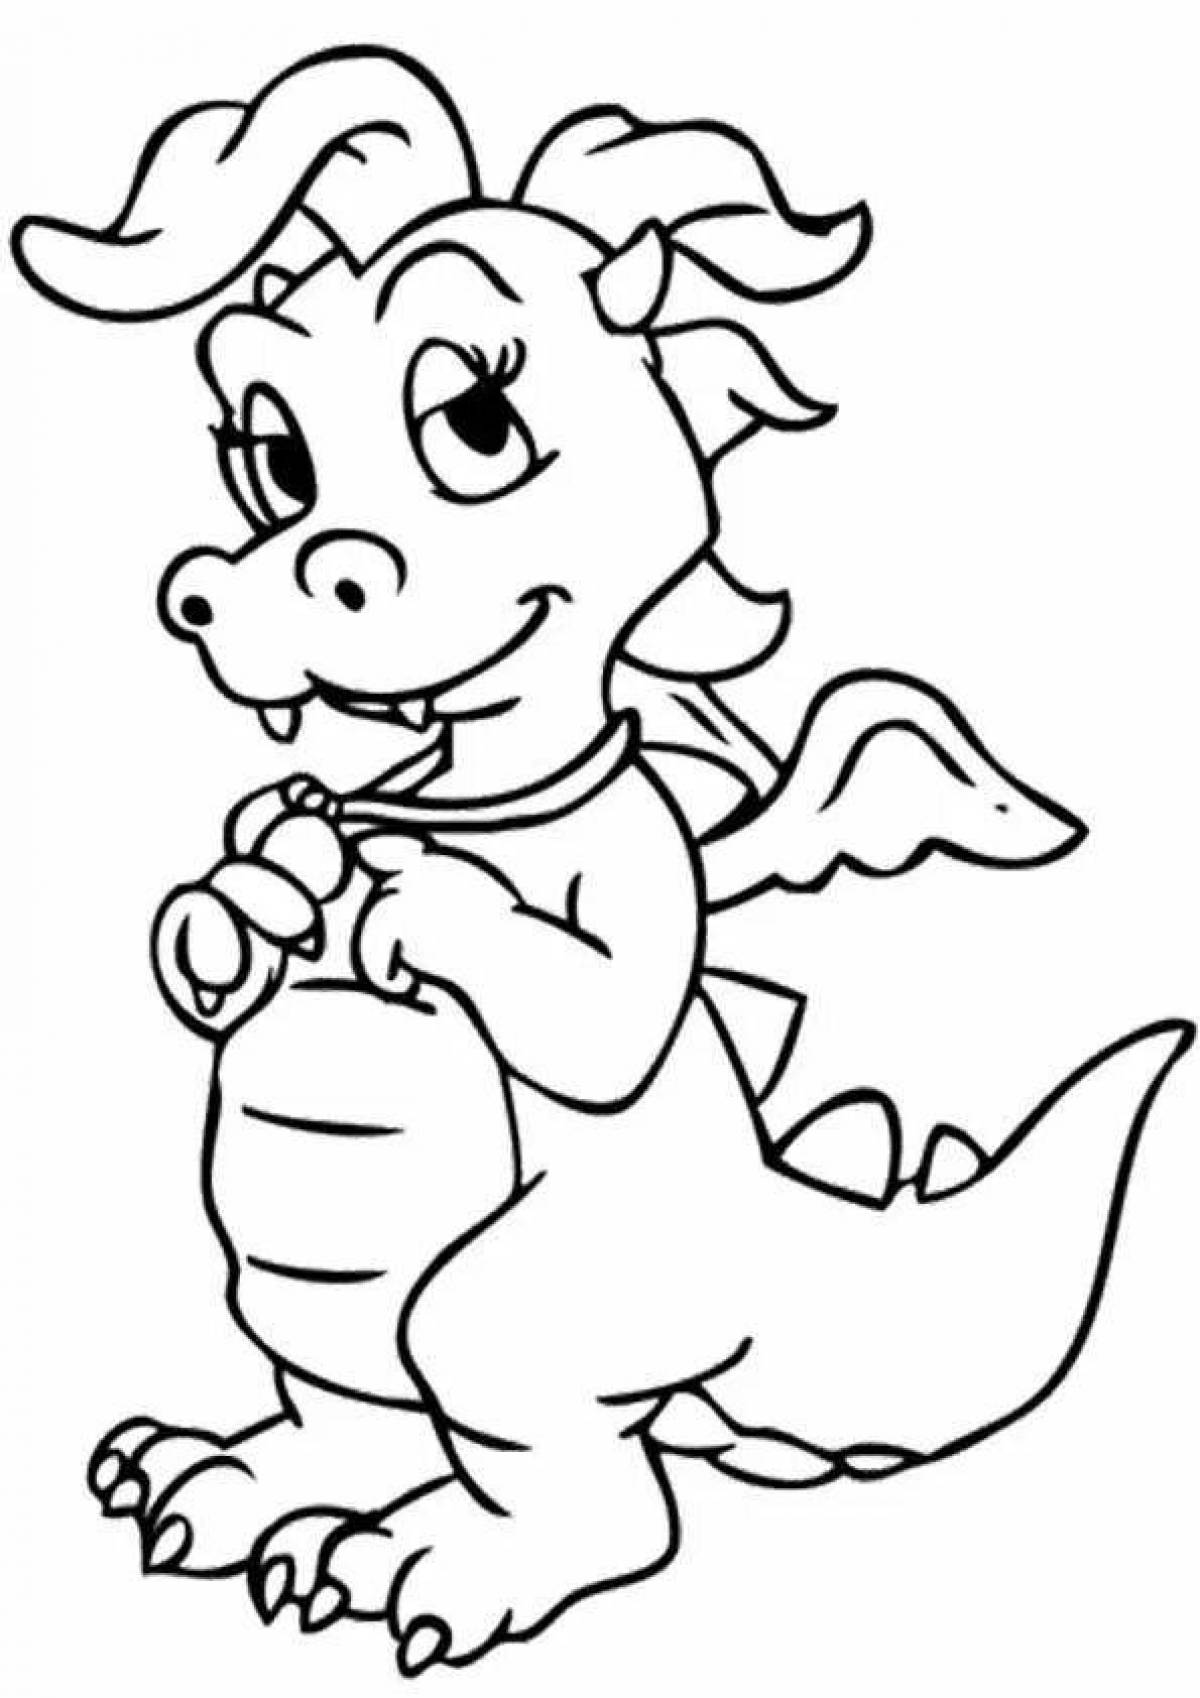 Creative coloring dragons for kids